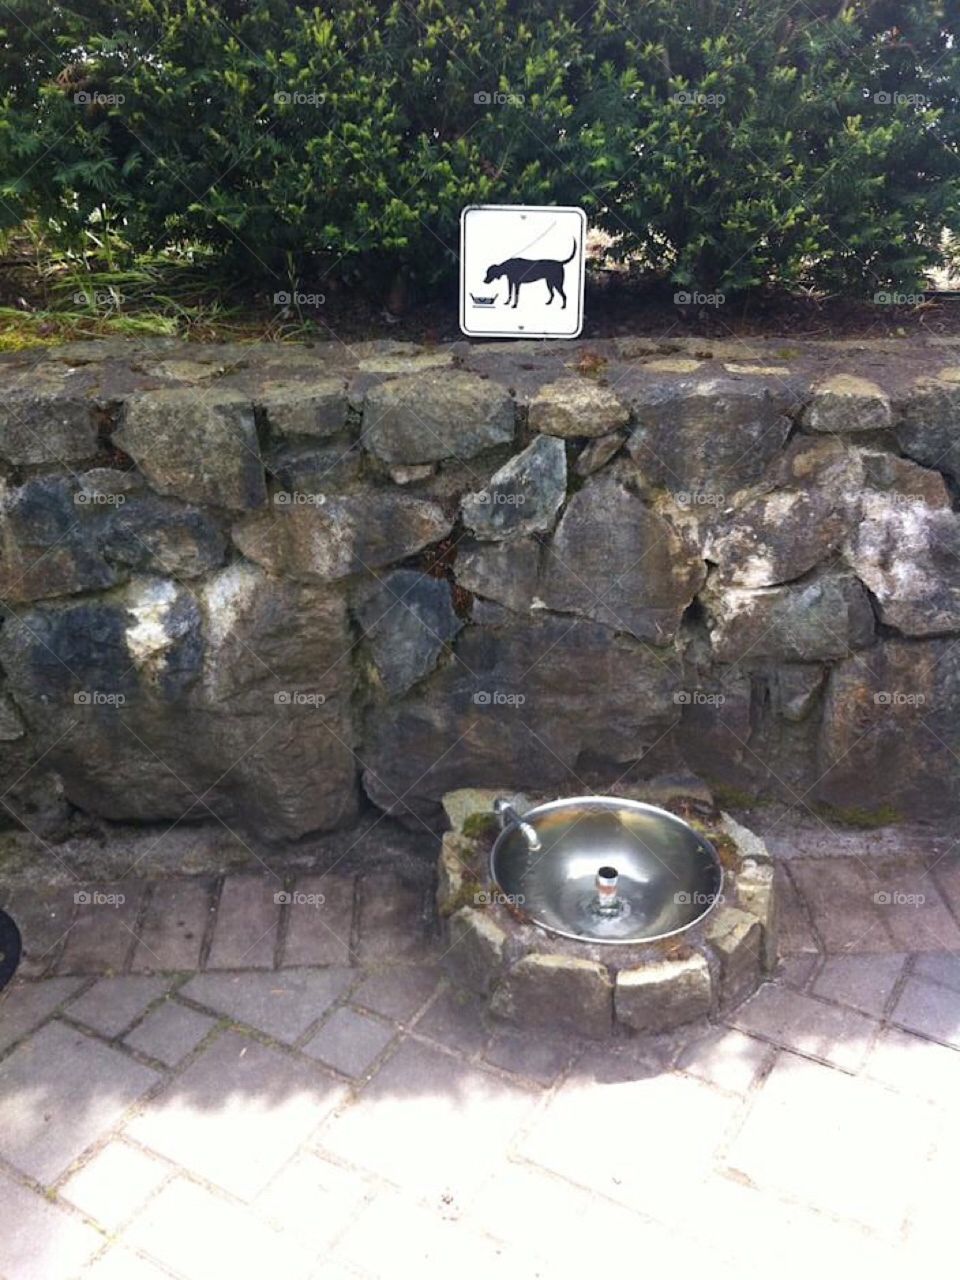 Alls dogs welcome! At Butchart Gardens in Victoria, BC...dogs have their own drinking fountains along the paths. Canada 🇨🇦 